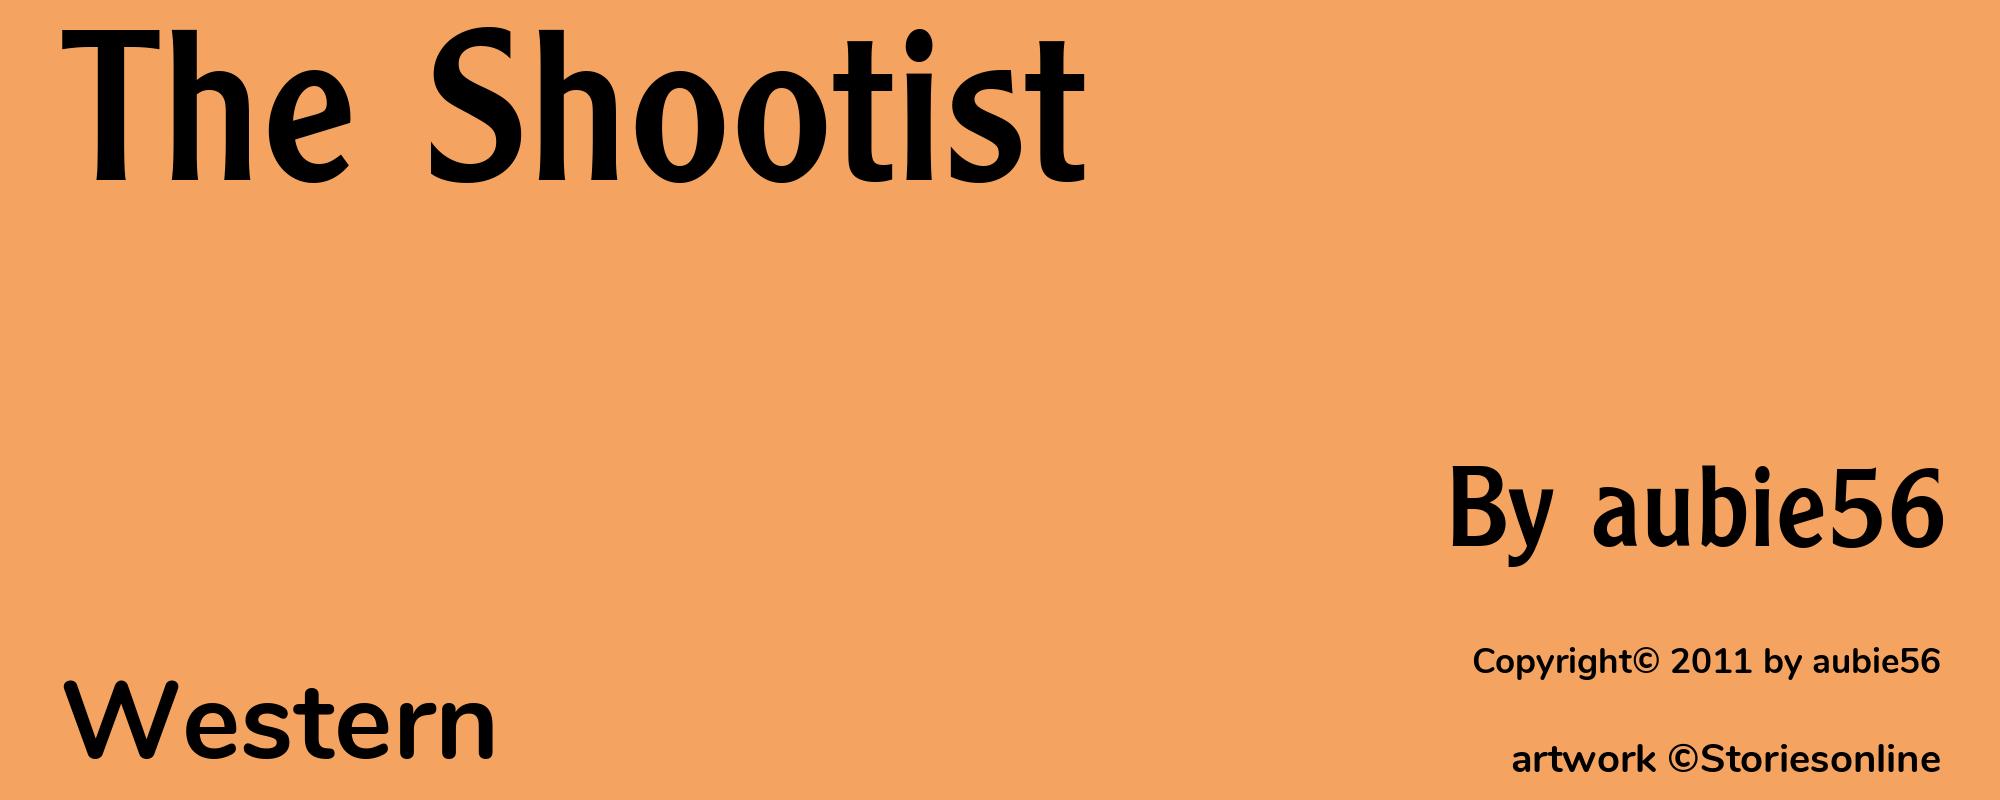 The Shootist - Cover